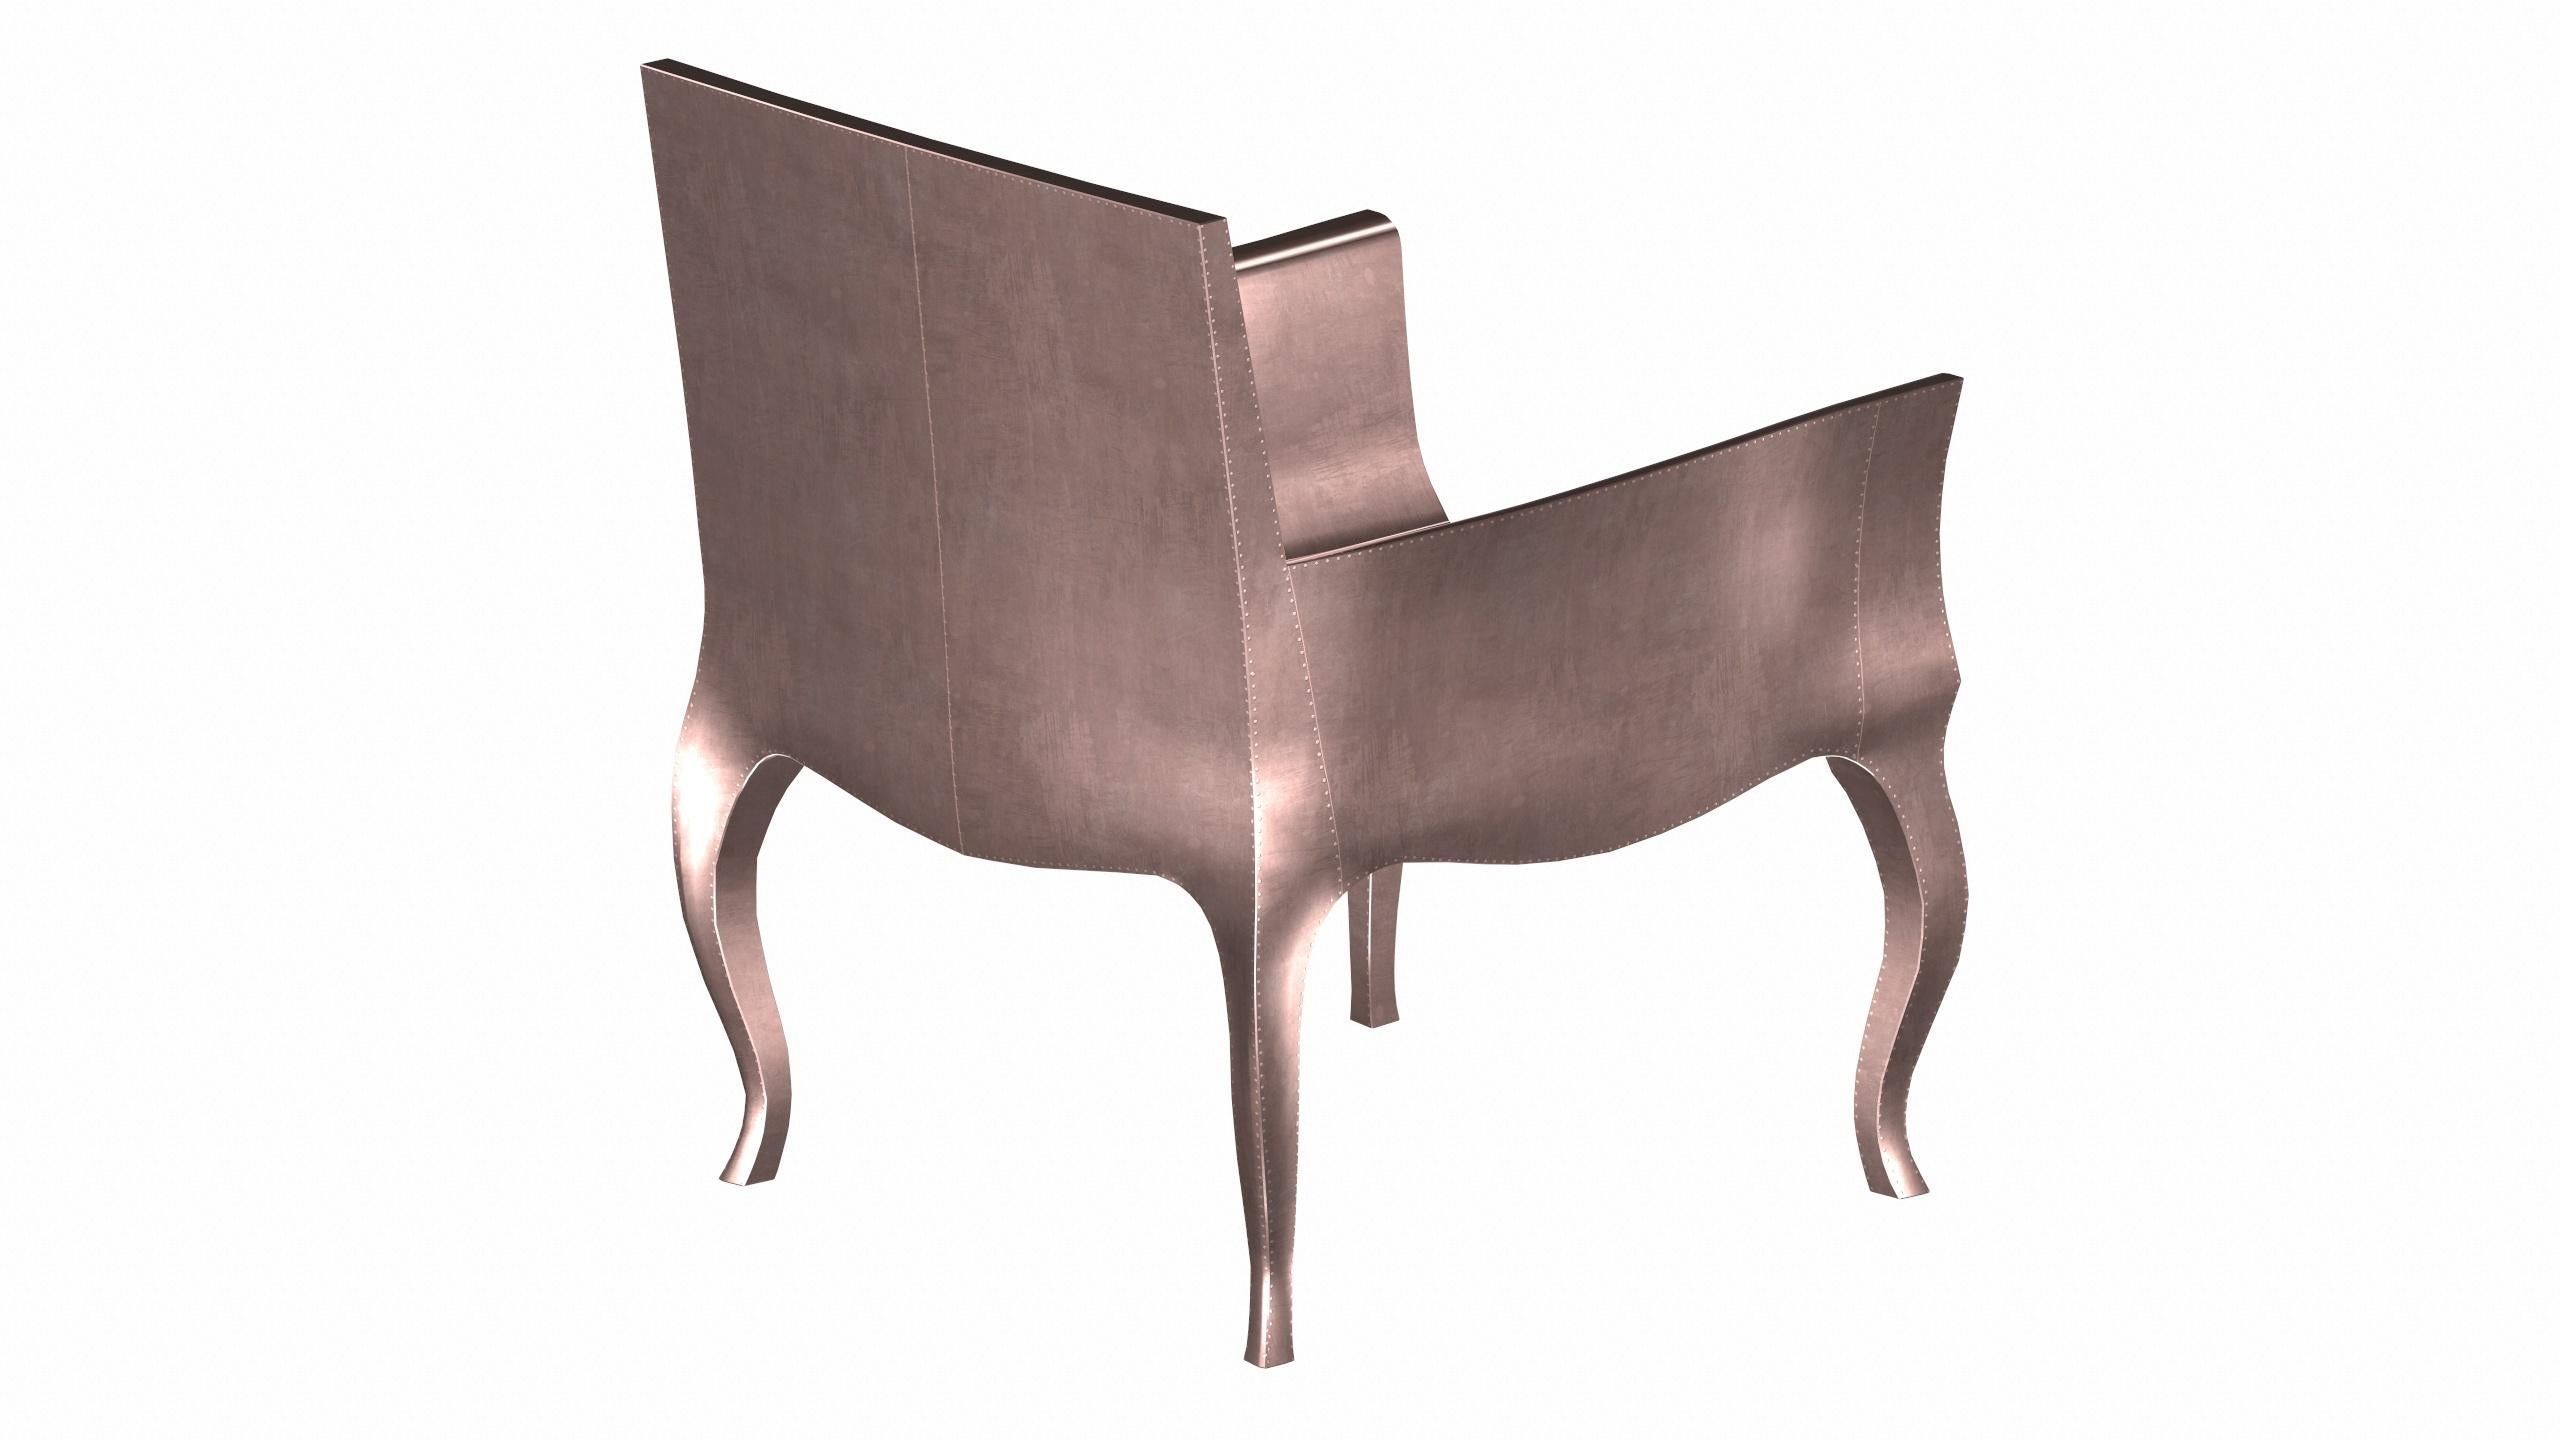 Indian Art Deco Style Chairs in Smooth Copper by Paul Mathieu for S. Odegard For Sale